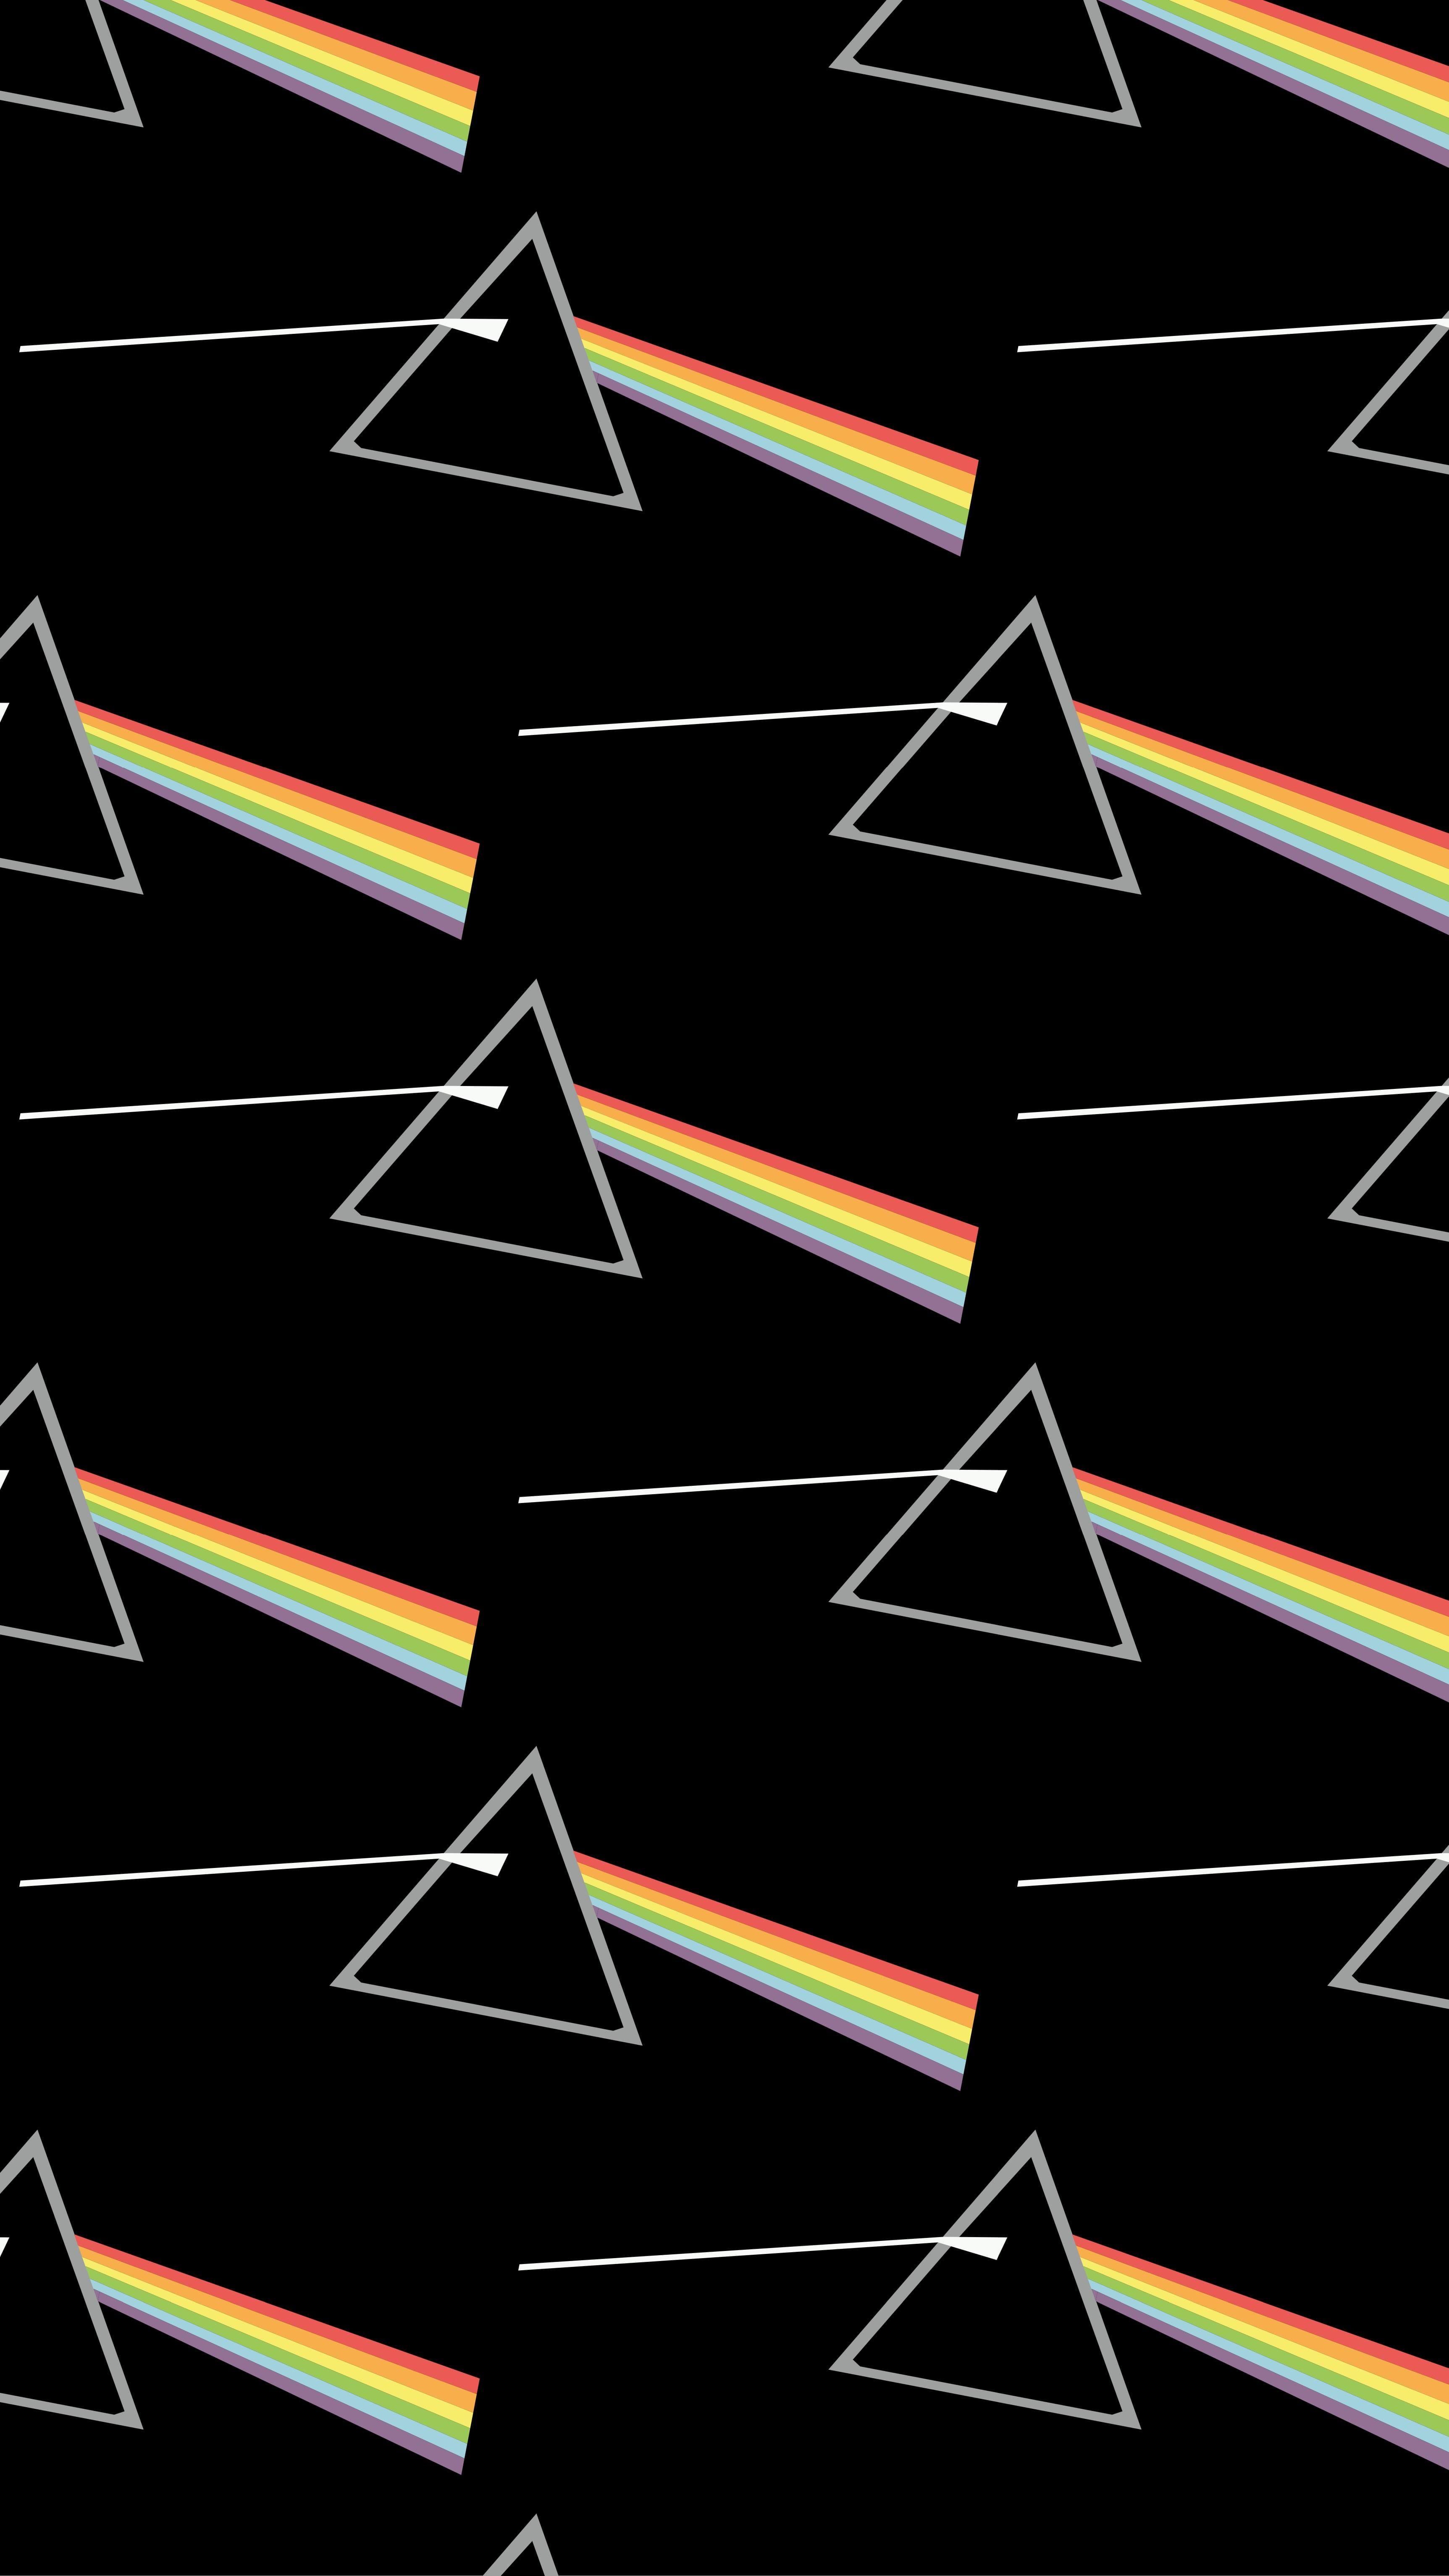 Here's a Pink Floyd Wallpaper for Mobile Devices. Pink floyd wallpaper, Pink floyd, Pink floyd art